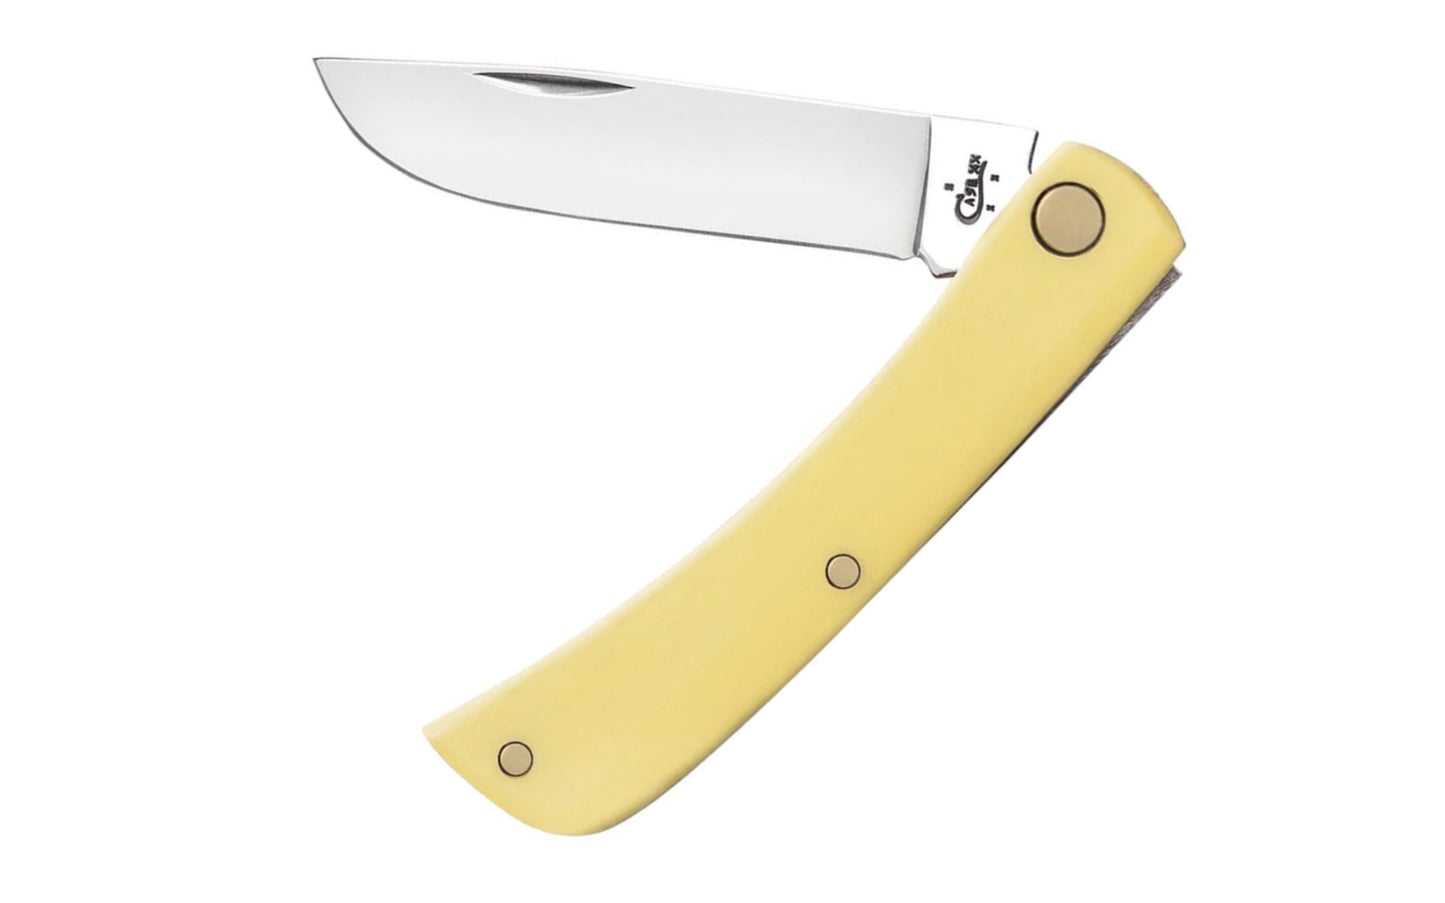 2-3/4" Sod Buster Jr. Folding Knife features a smooth, yellow synthetic handle is built to take abuse. Includes a chrome vanadium steel blade. 3-5/8" closed length. Made by Case Knives.  Made in USA.